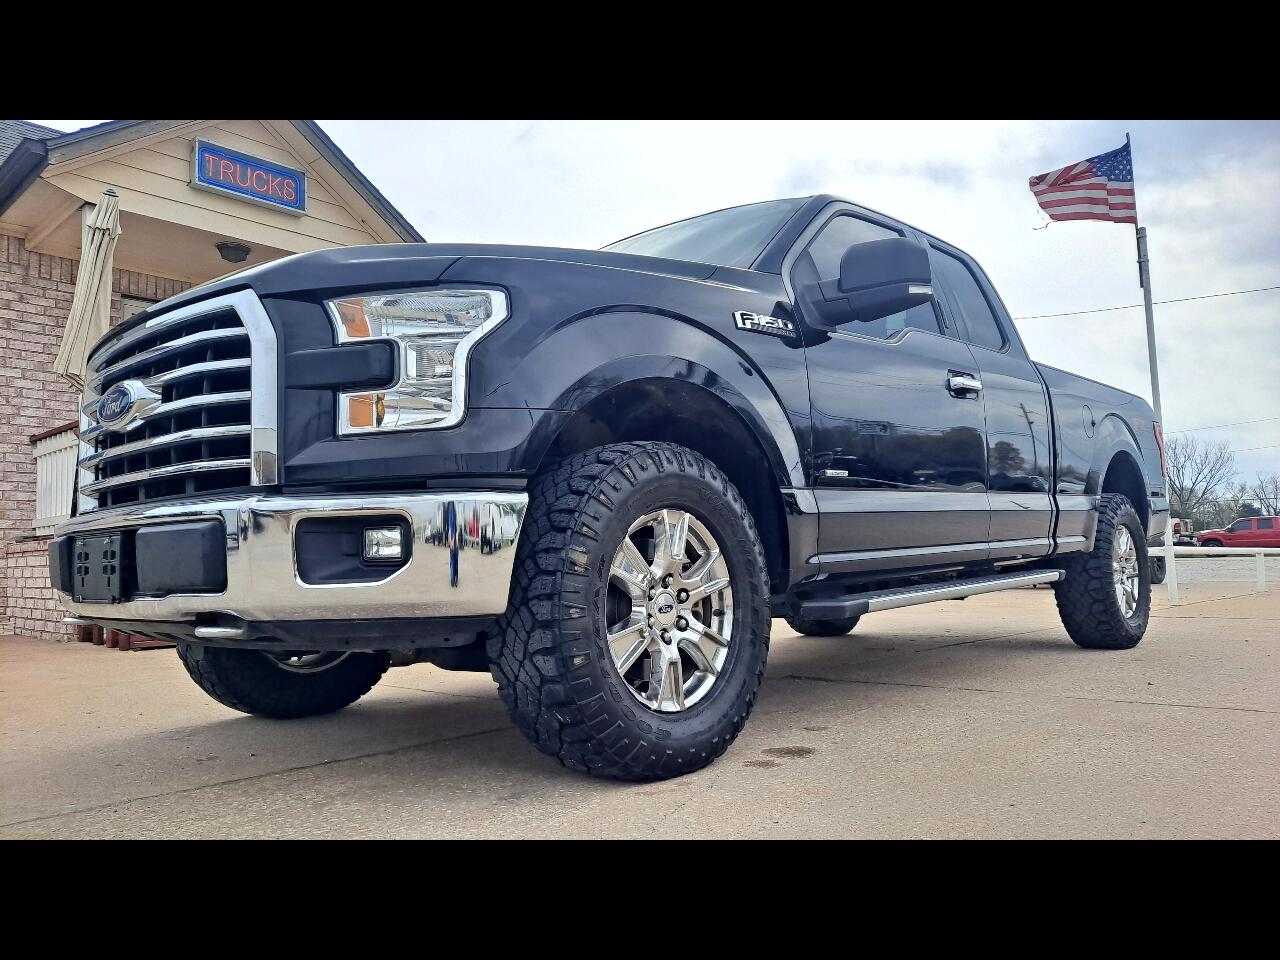 2017 Ford F-150 XLT SuperCab 6.5-ft. Bed 4WD